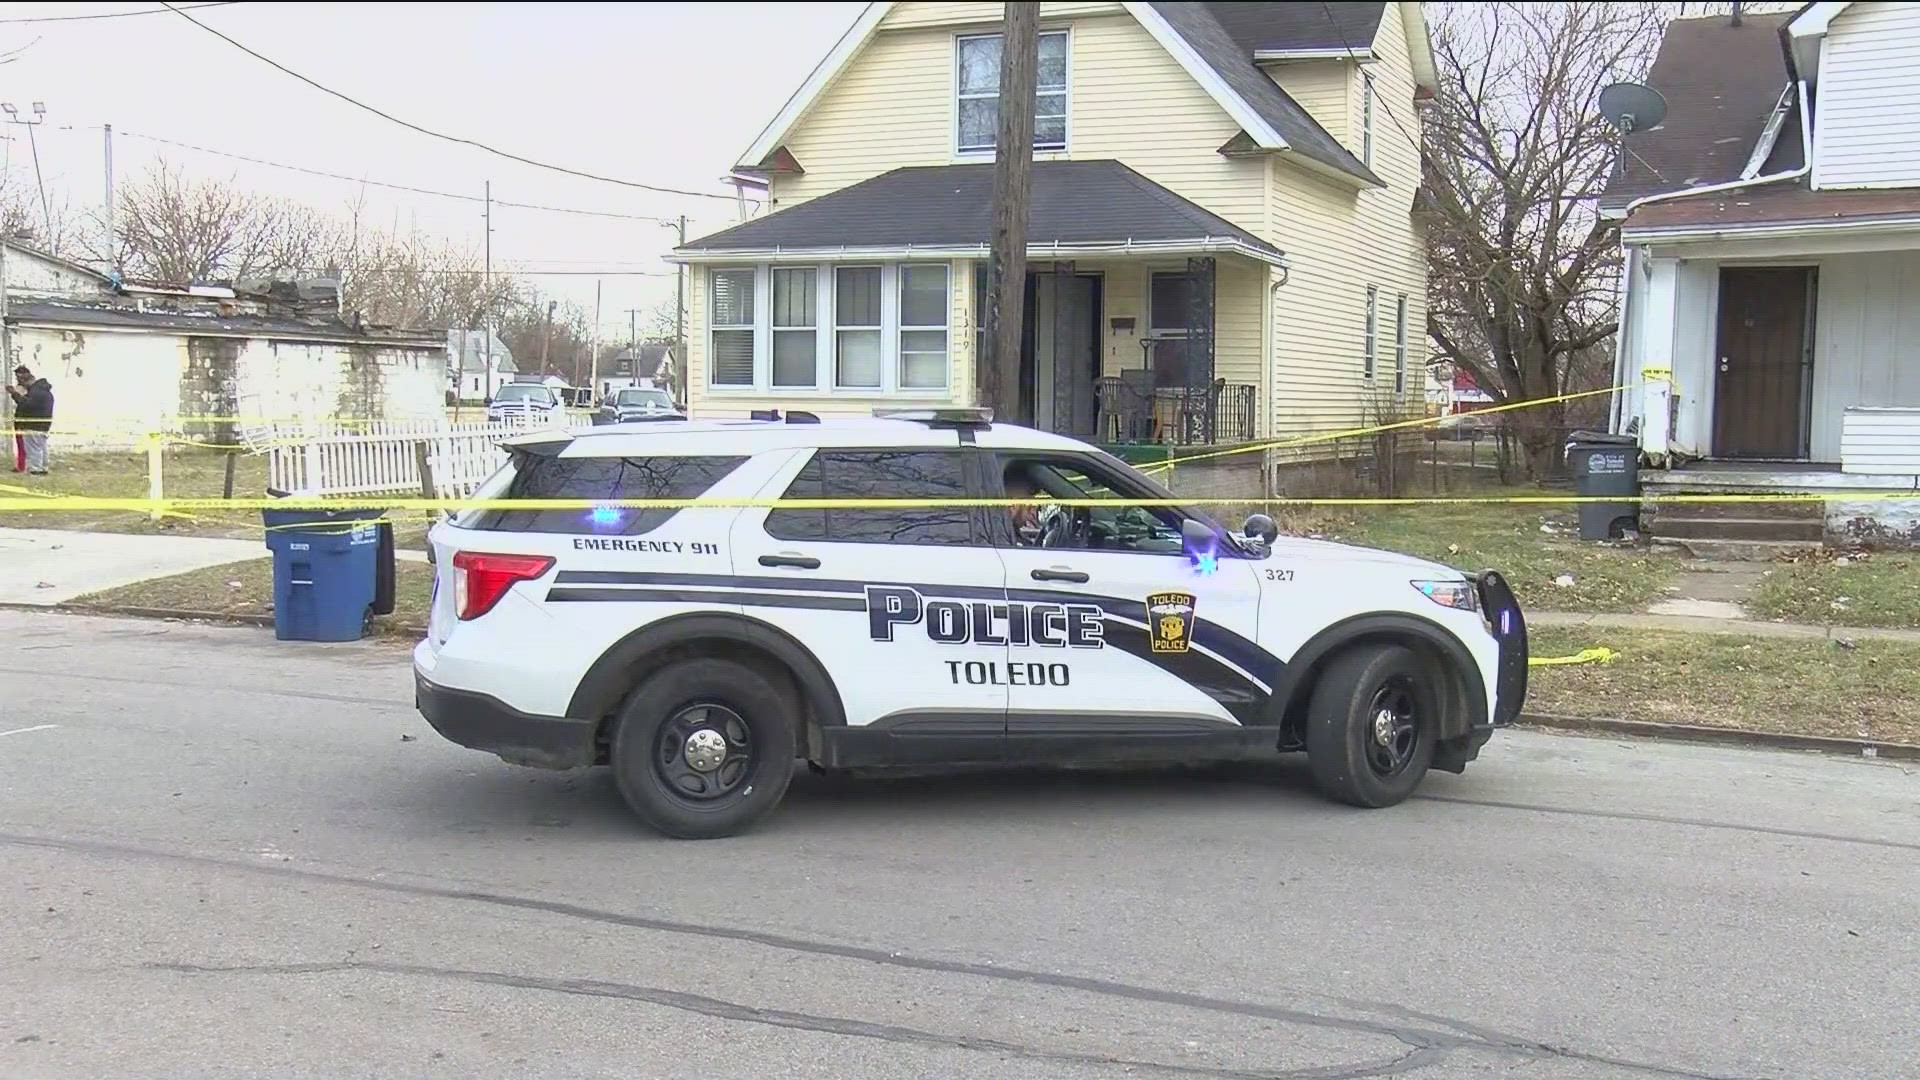 A 3-year-old girl found a gun and accidentally shot herself inside a home on Woodruff Avenue Tuesday afternoon, a source with the city of Toledo told WTOL 11.